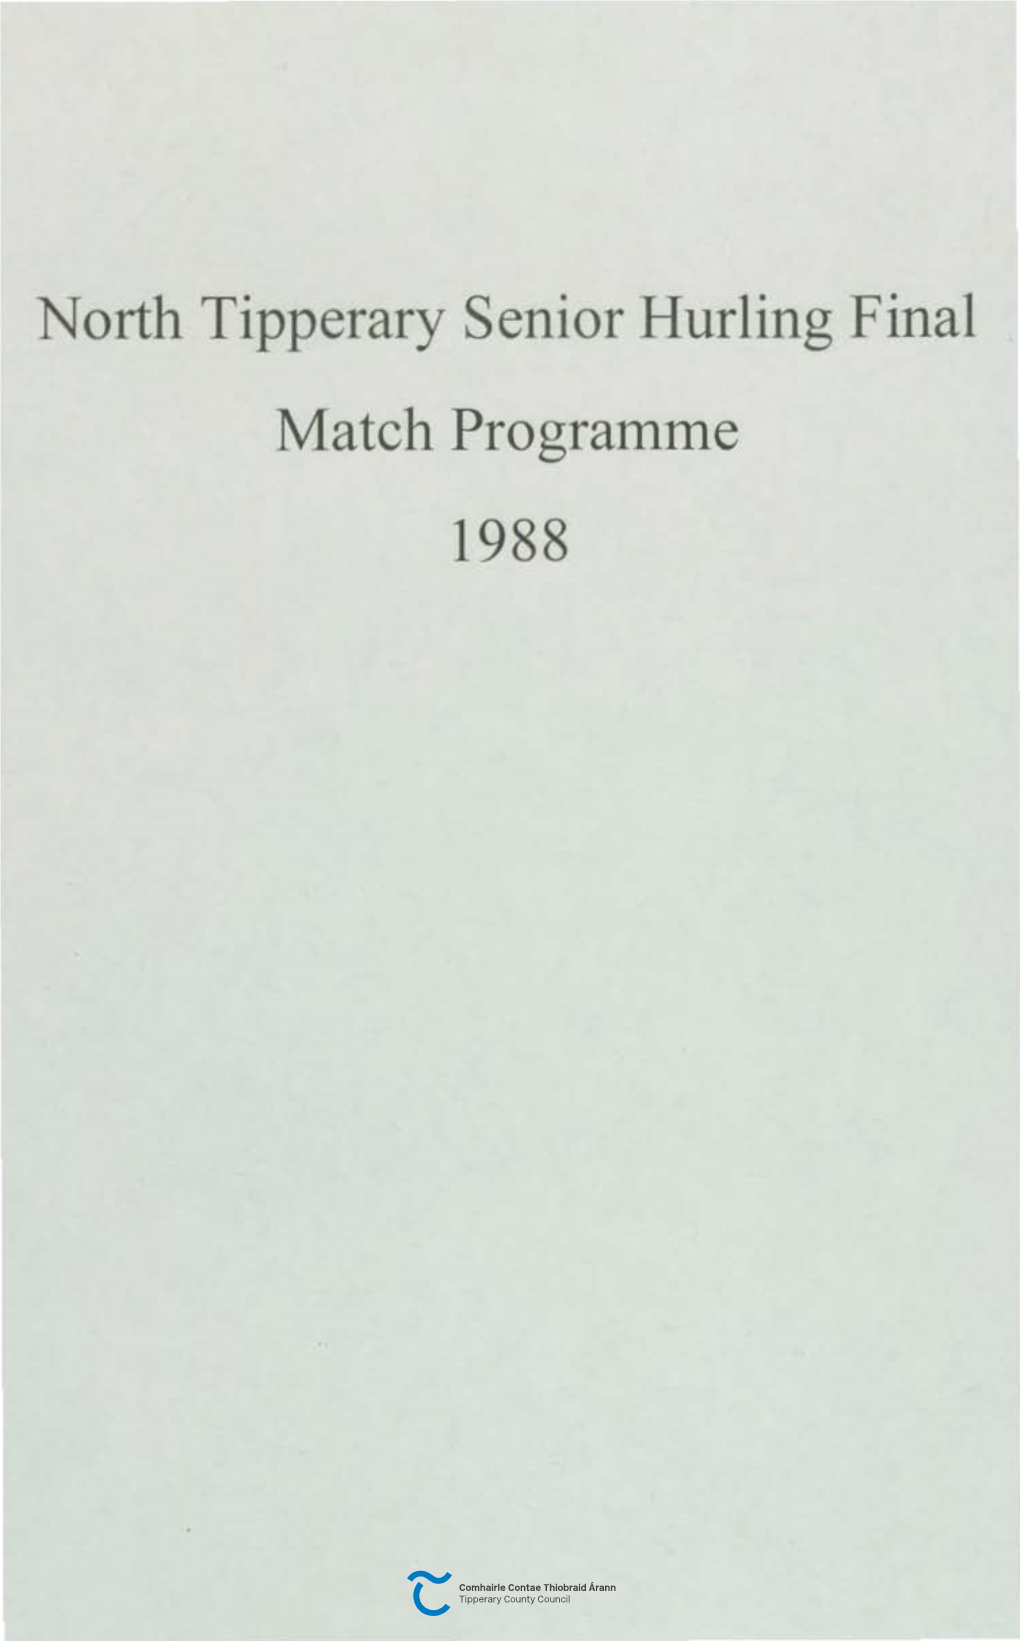 North Tipperary Senior Hurling Final 11Atch Programme 1988